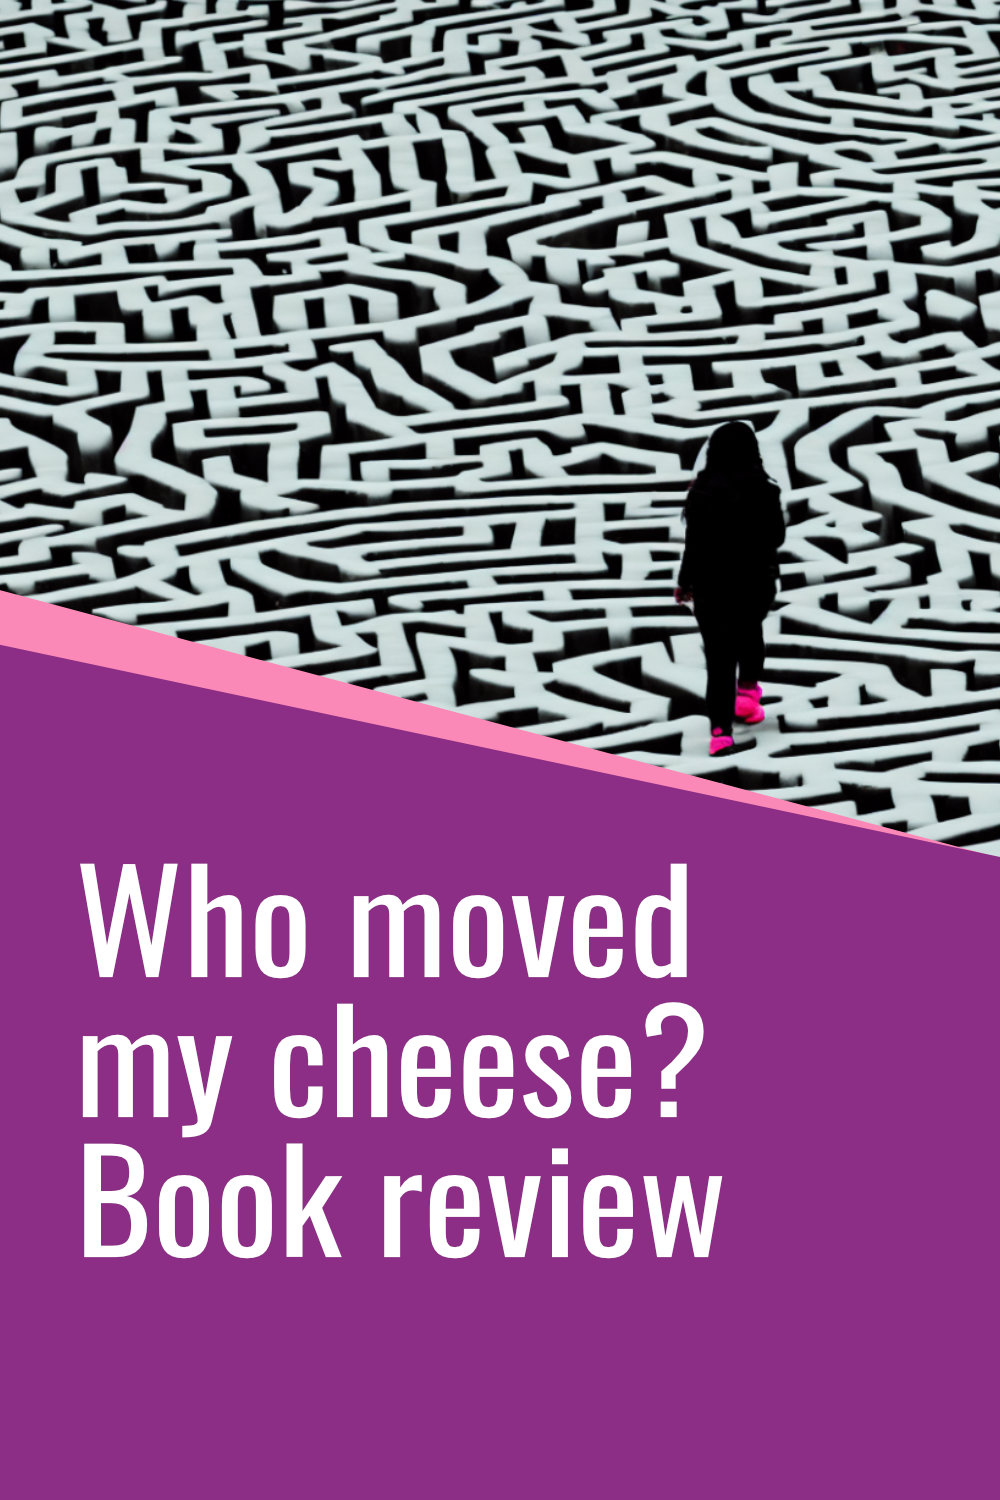 Image for pinterst that shows a woman walking through a maze and the text Who moved my cheese? Book review